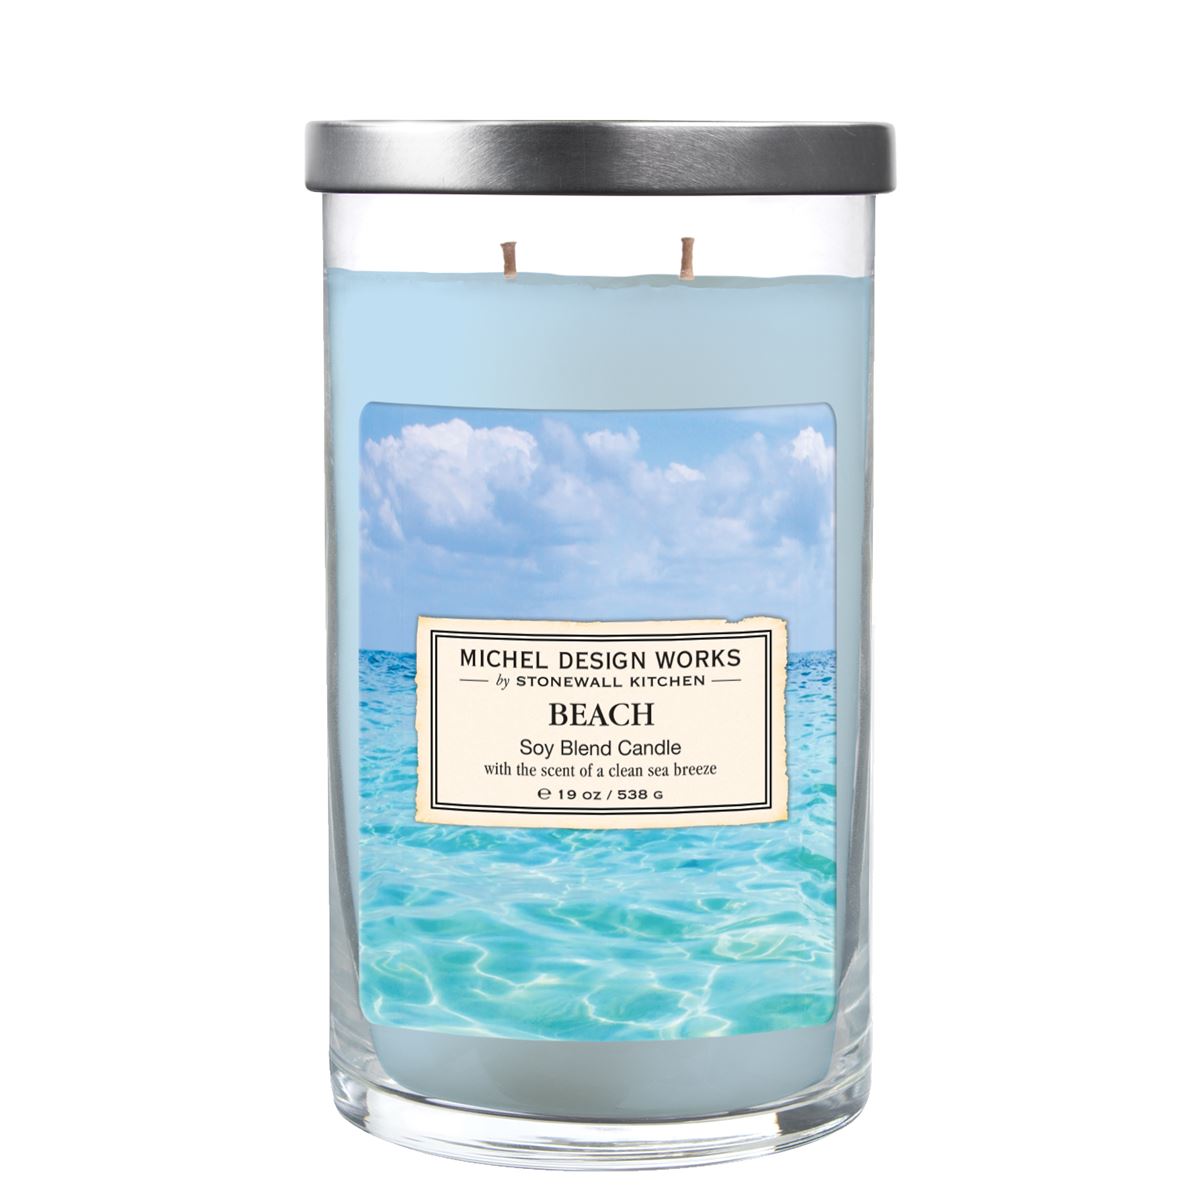 Michel Design Works - Beach Large Tumbler Candle